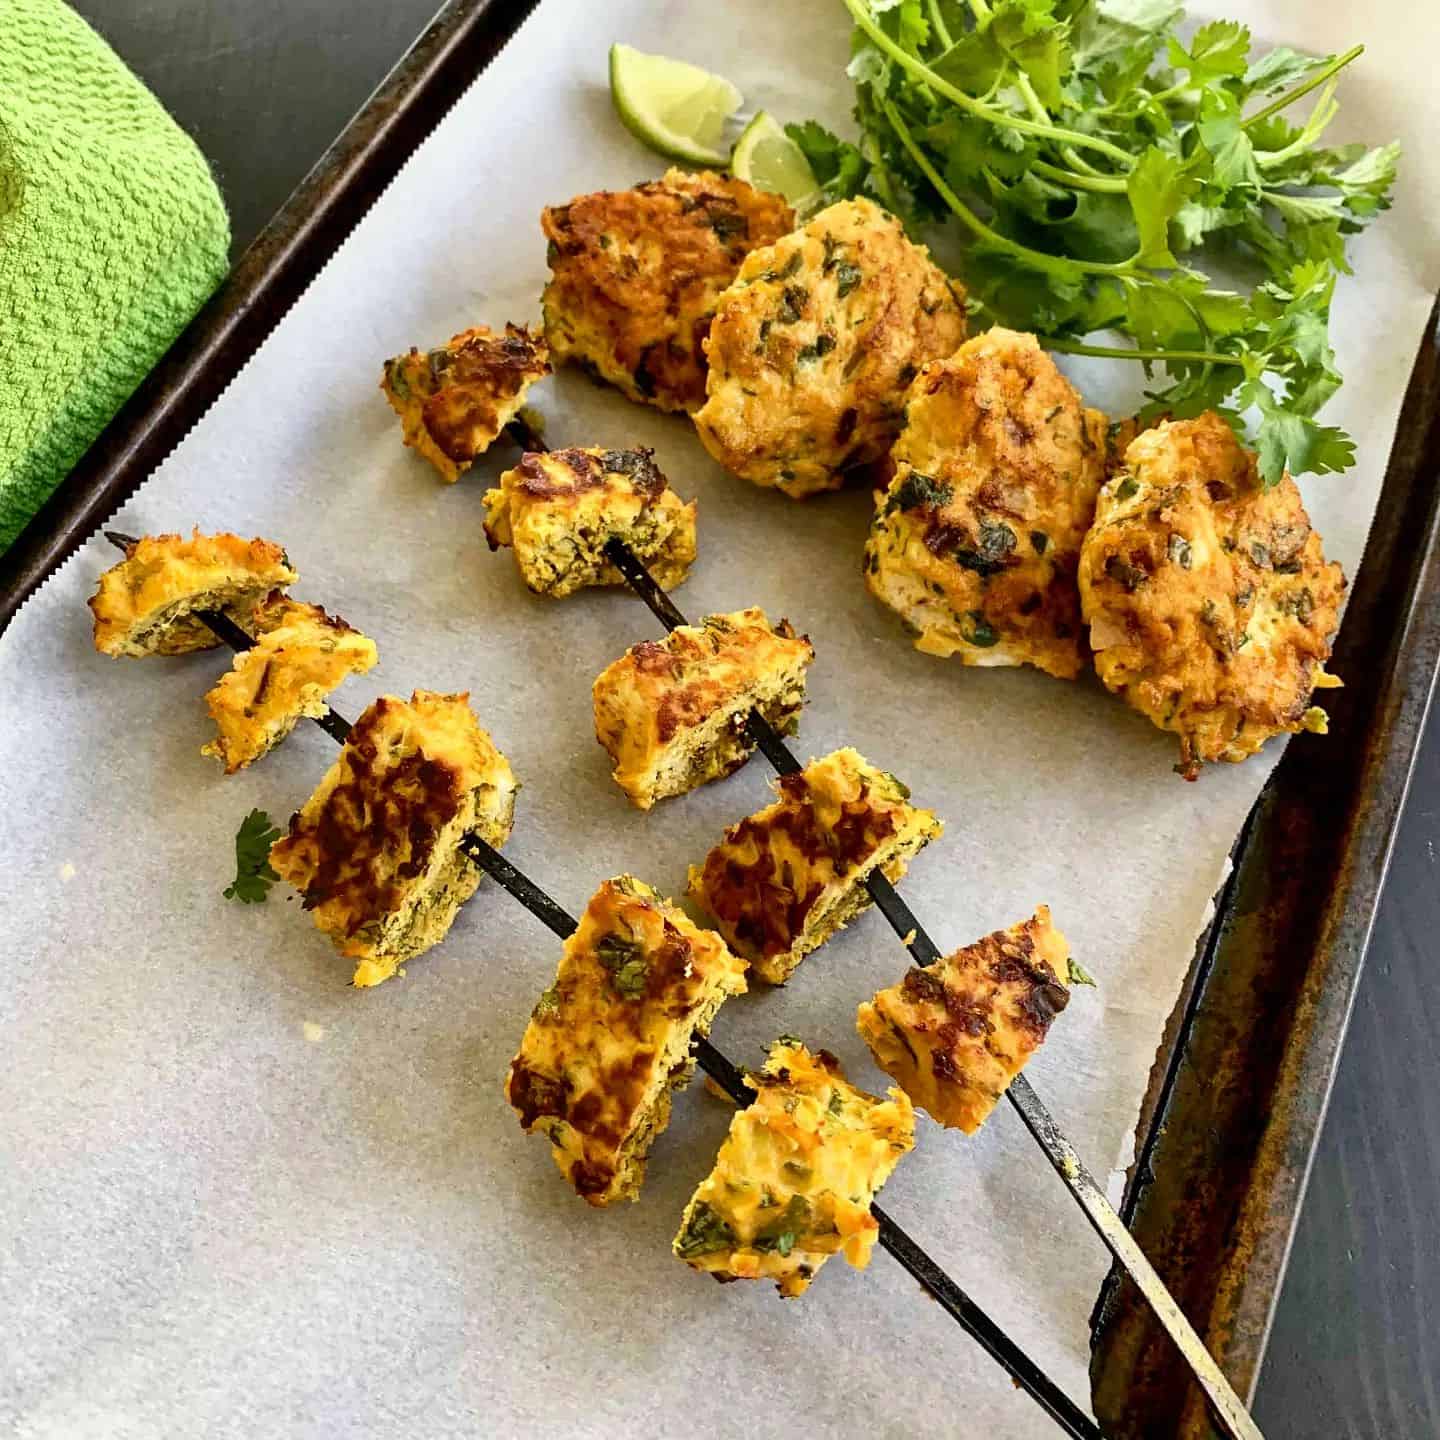 Chicken Kebabs
These chicken cutlets/kebabs are great for batch cooking and are packed with flavors of ginger, garlic and cilantro!

https://cook2nourish.com/2014/05/easy-chicken-mince-kababs-shaami-kababs.html

#autoimmunedisease #aip #autoimmuneprotocol #cook2nourish #dairyfree #aiprecipes #aipdiet #rheumatoidarthritis 
#glutenfree #nutfree #immunebooster #AIPfollow #autoimmuneawareness #dietistanutricionista #fitlife